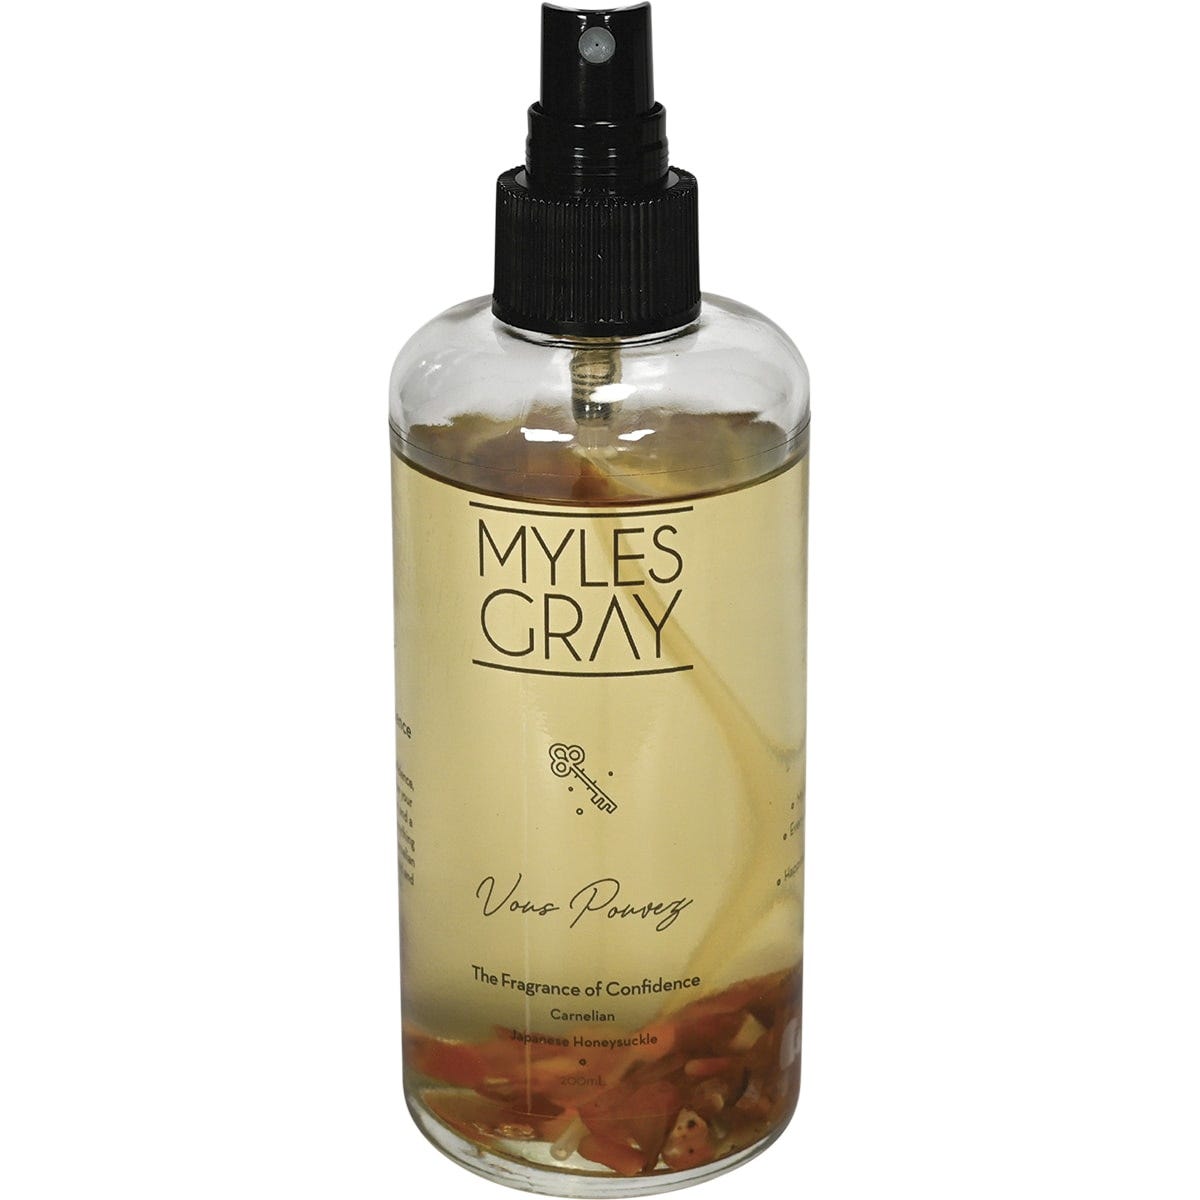 Myles Gray Crystal Infused Room Spray Japanese Honeysuckle 200ml - Dr Earth - Cleaning